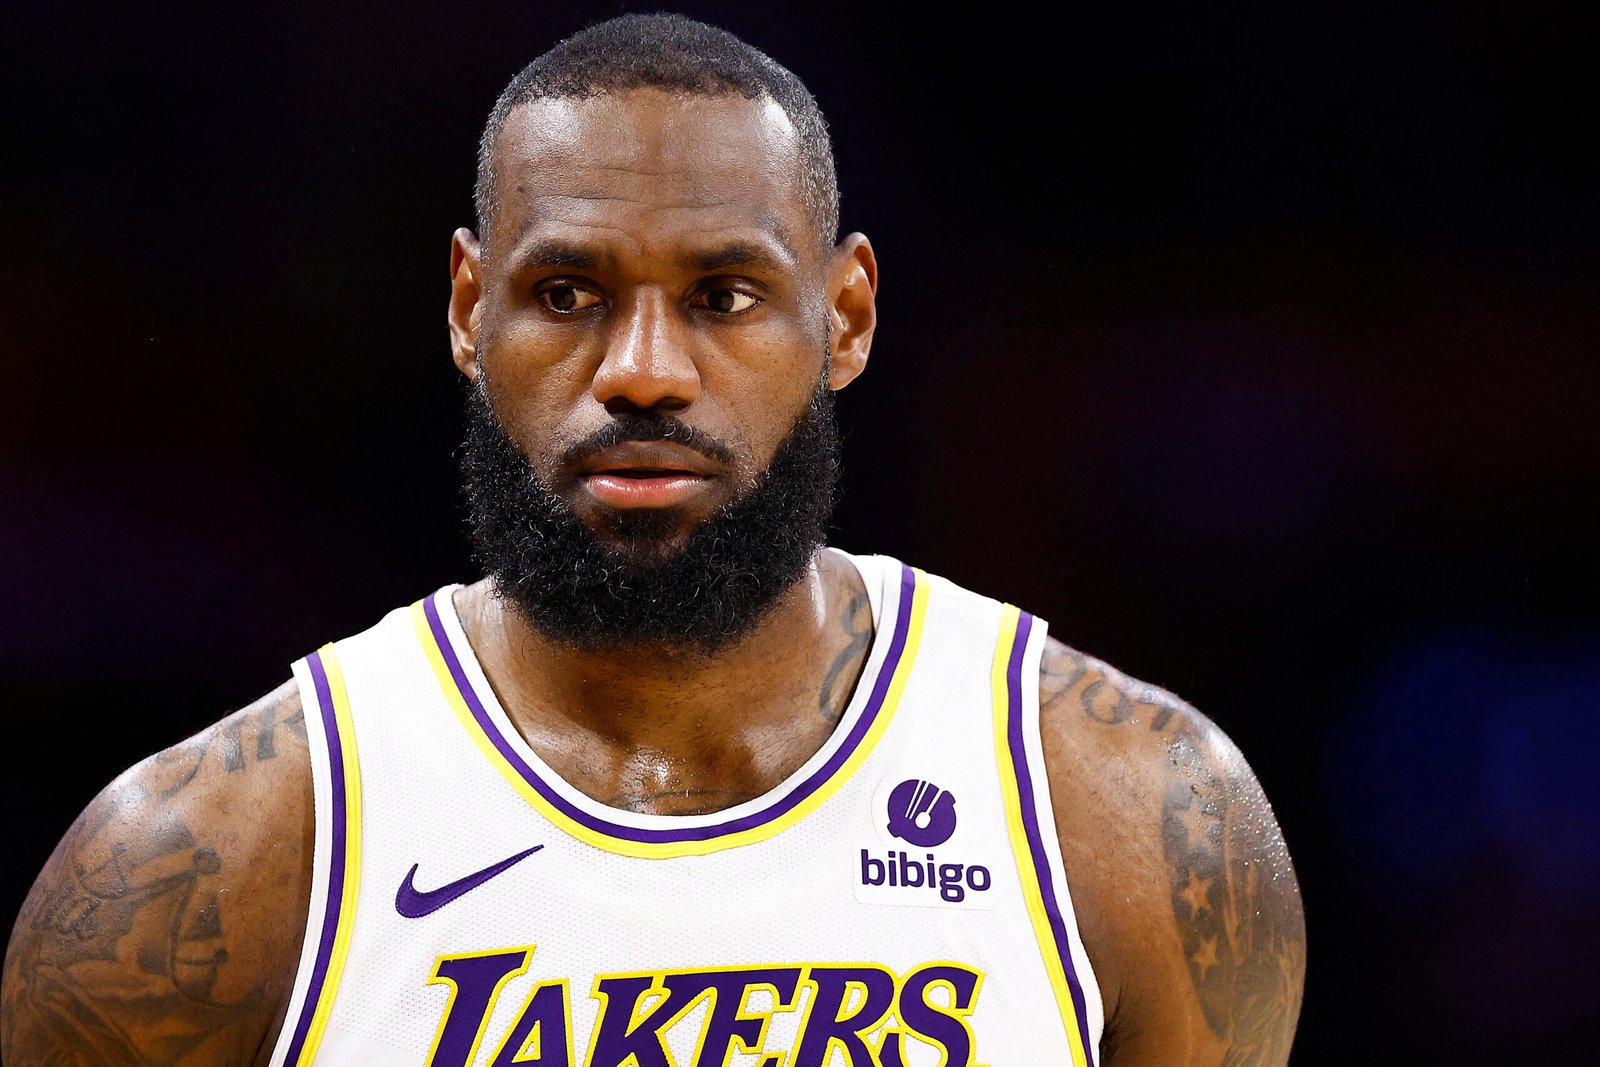 Lakers clearly hope to lock down LeBron for good next